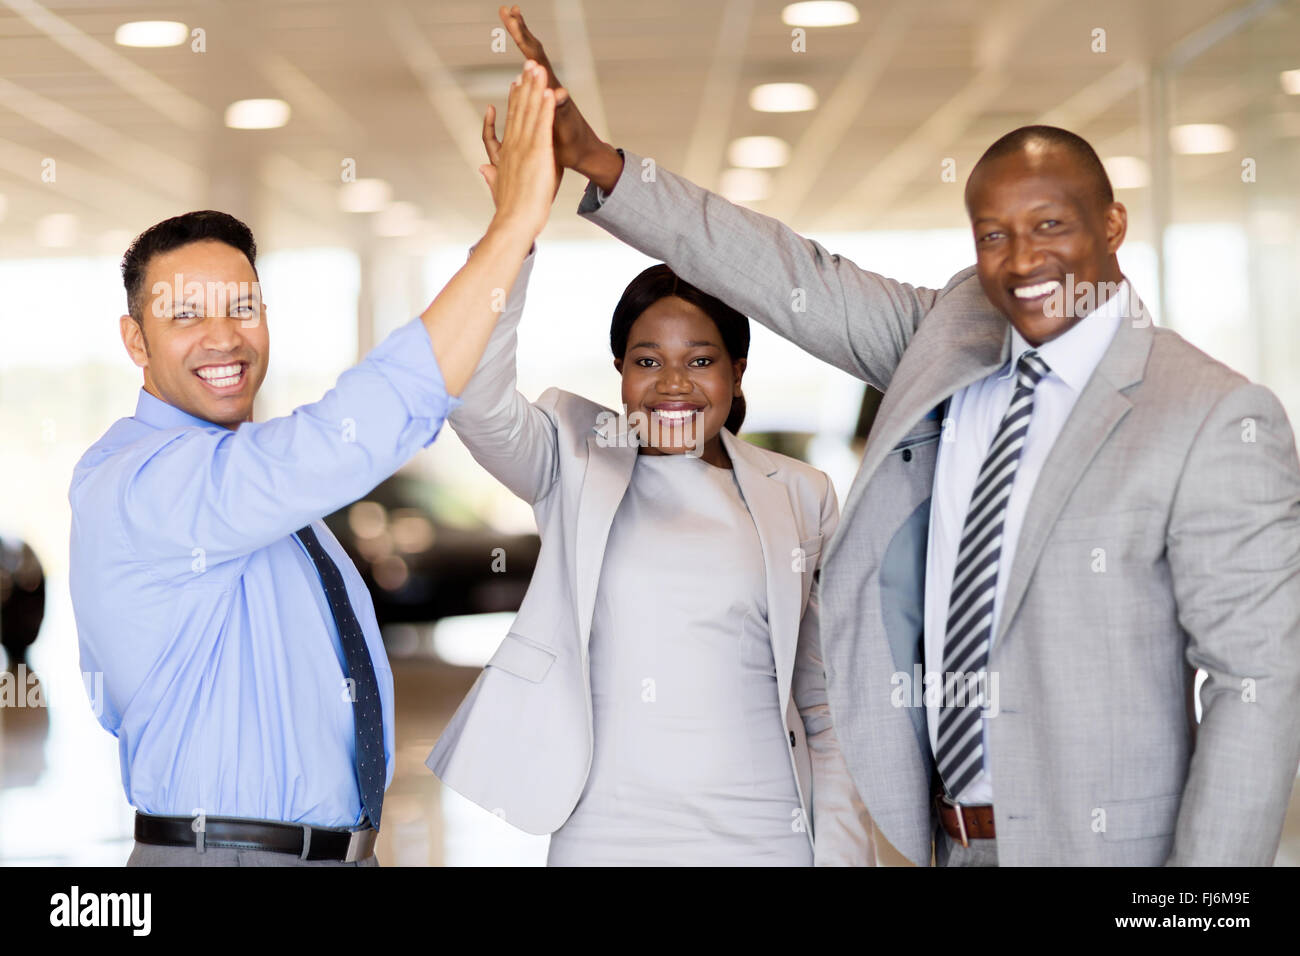 successful car dealership staff giving high five in showroom Stock Photo